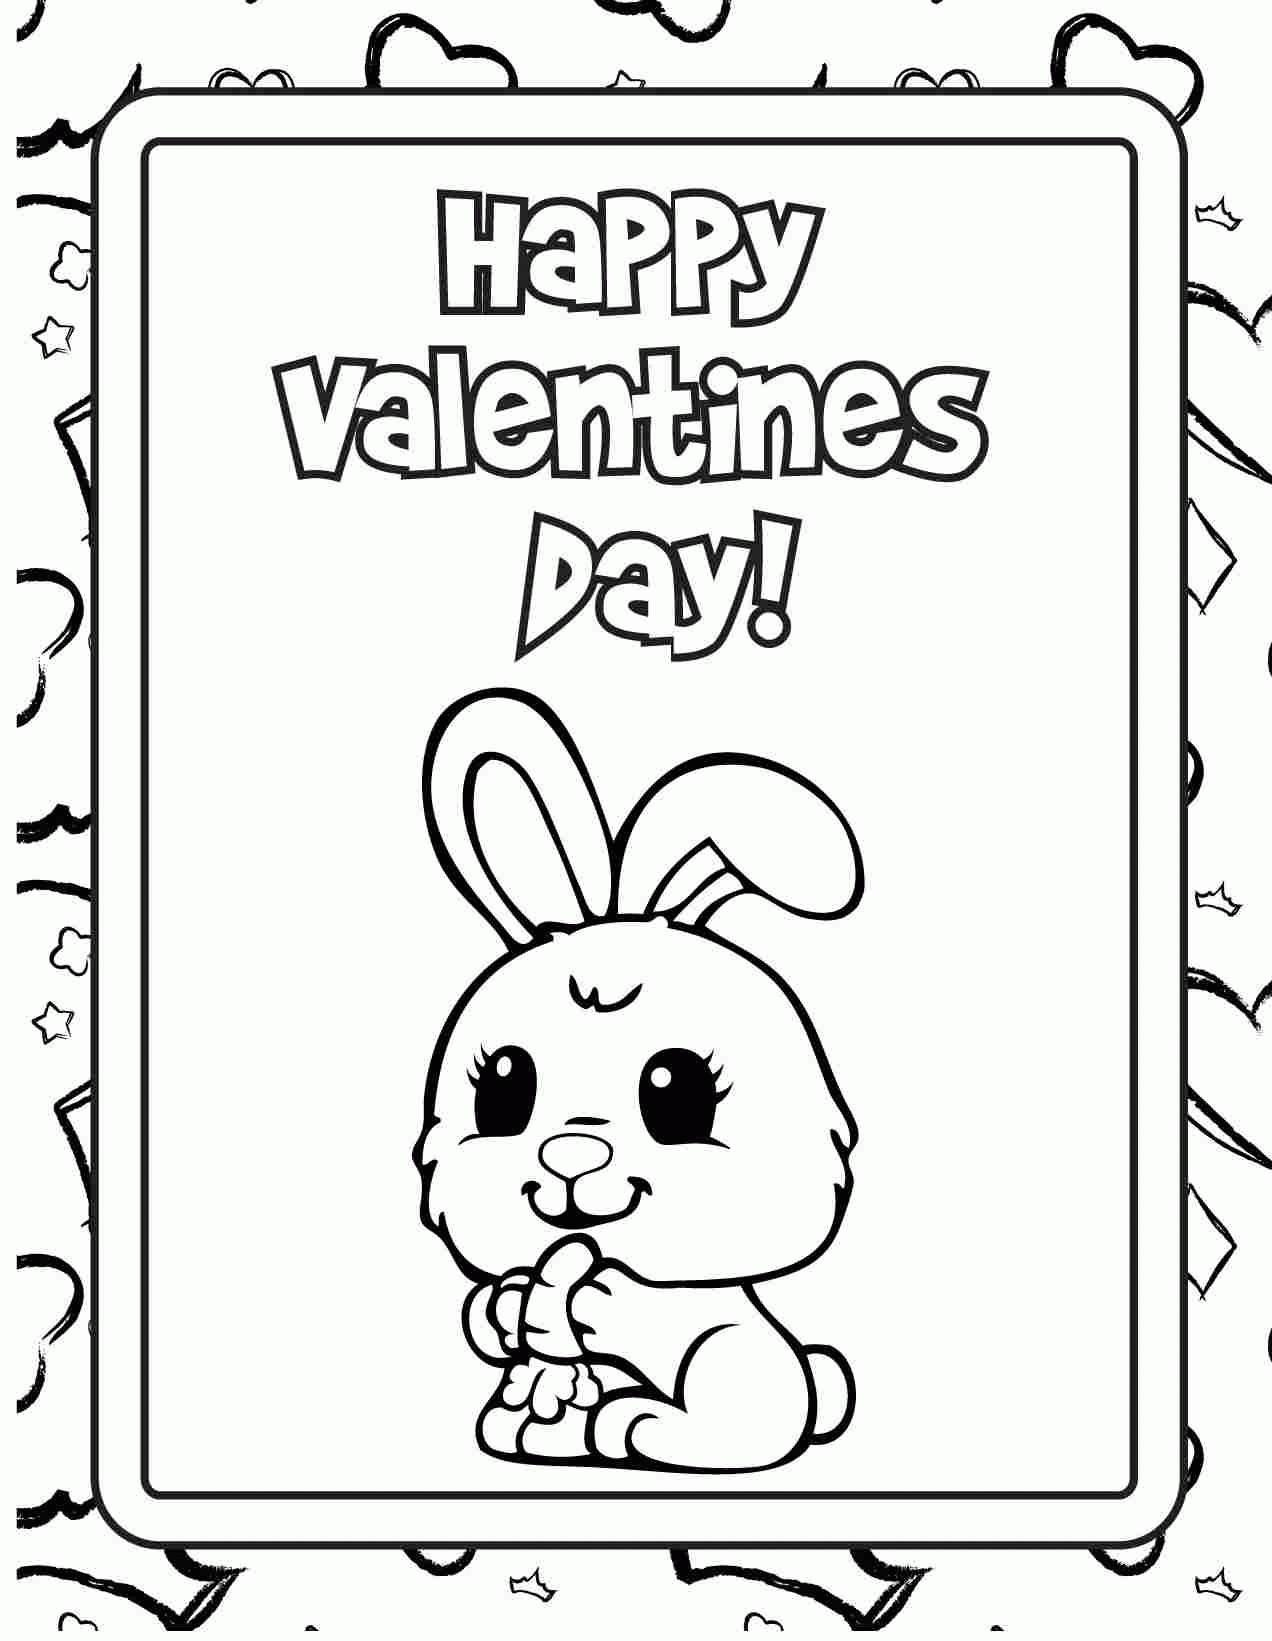 printable colouring valentines cards free coloring pages for valentines cards coloring home cards valentines colouring free printable 